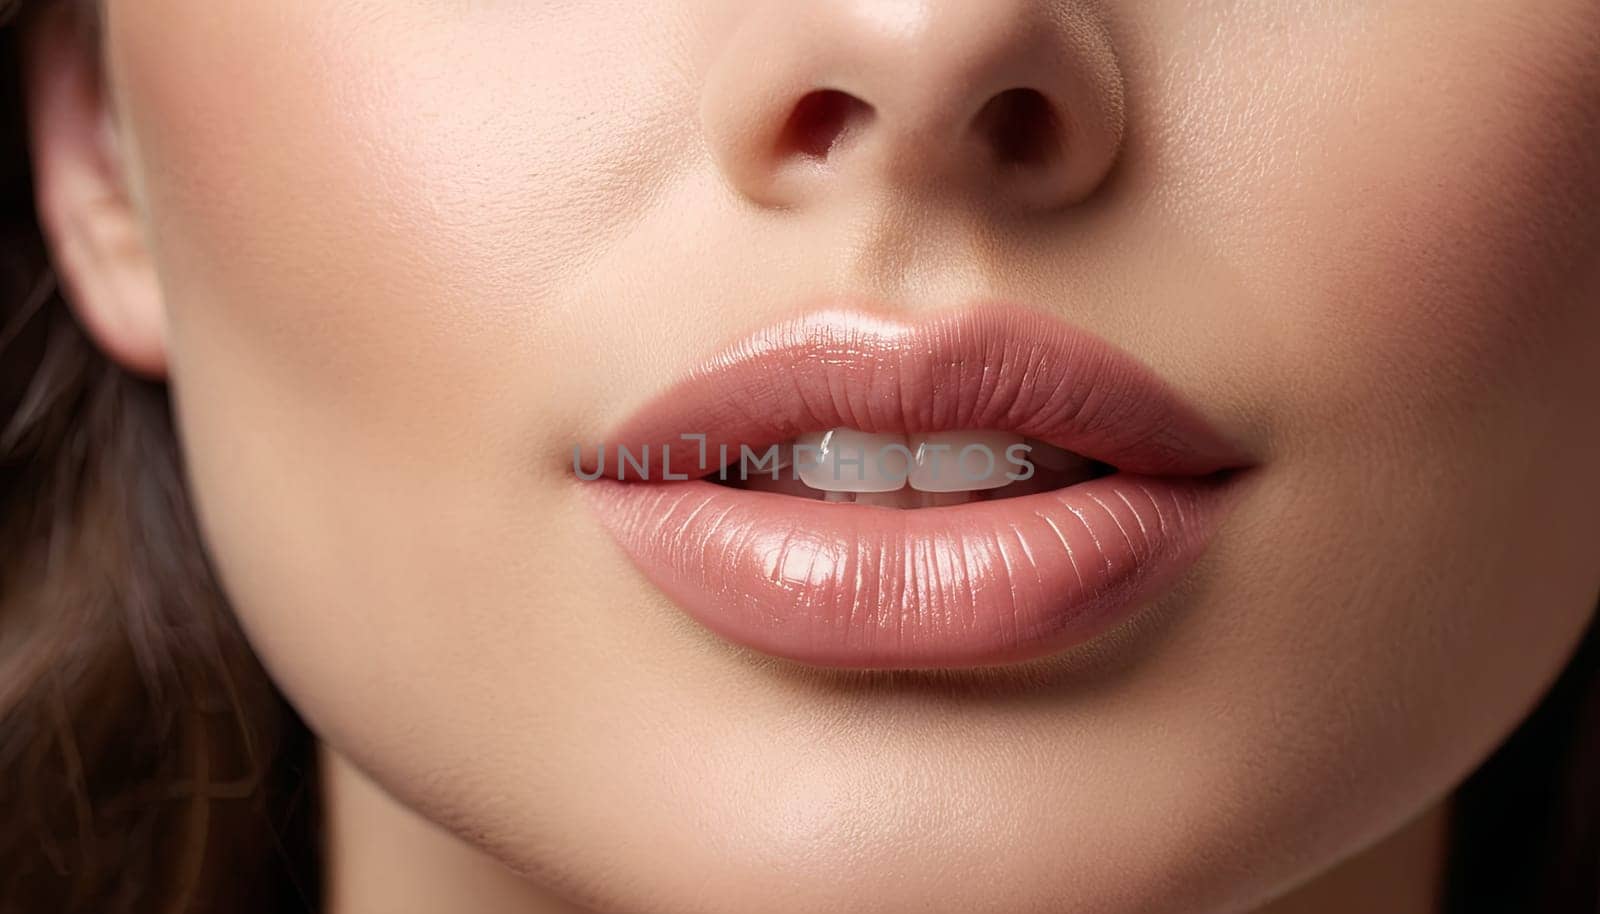 Close-up woman’s lower face, showcasing clear complexion against a blue background. Image captures detail of skin texture, lips, used for skin care promotion